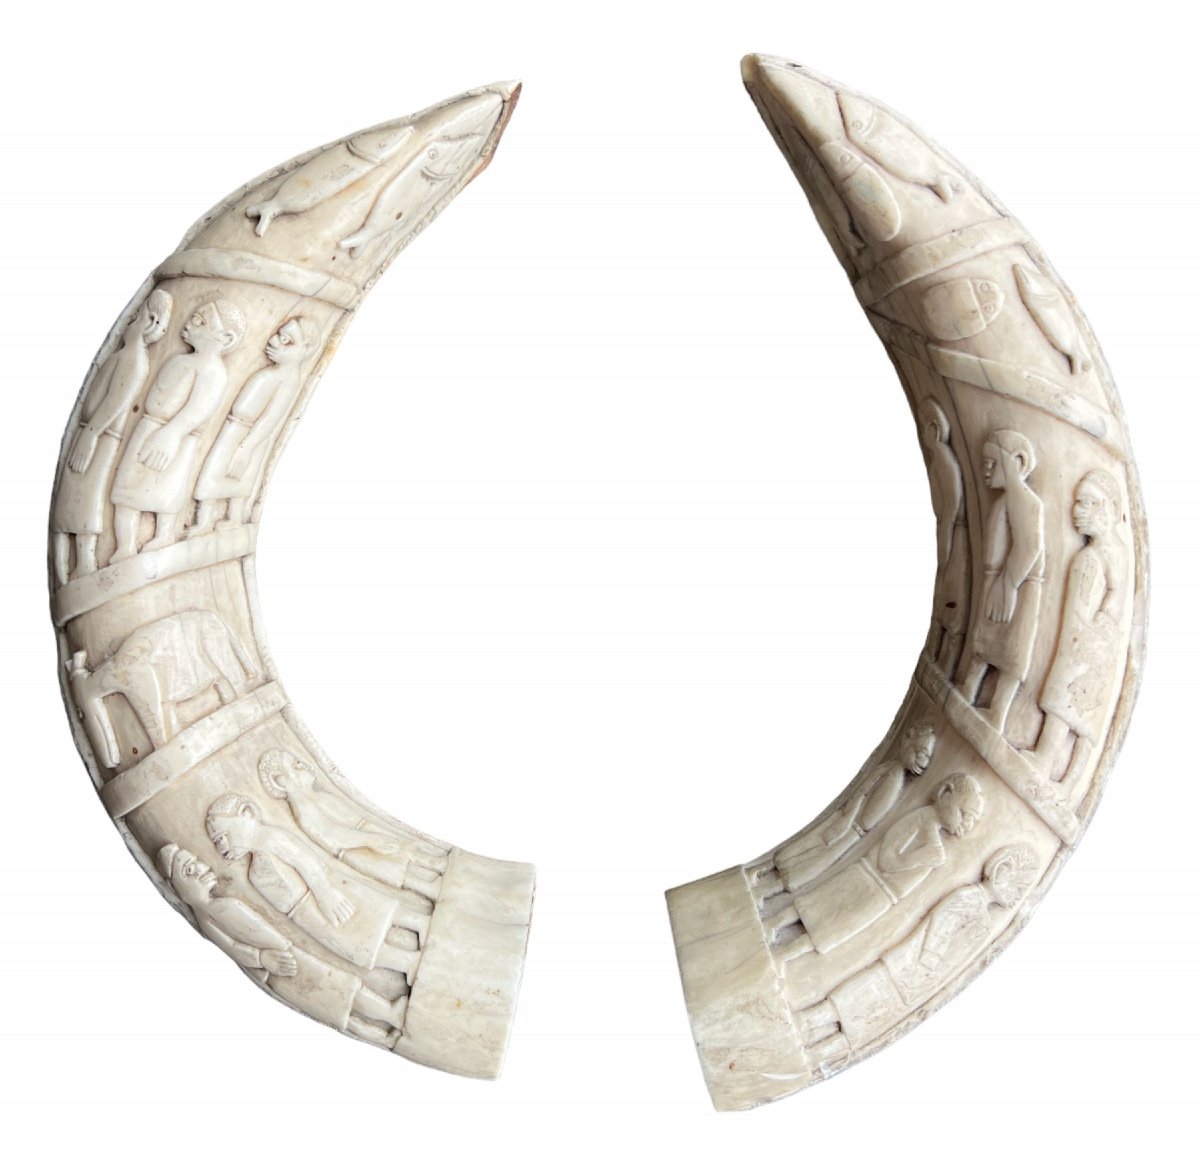 Pair Of Loango Teeth From Congo -africa/african- End Of 19th Century